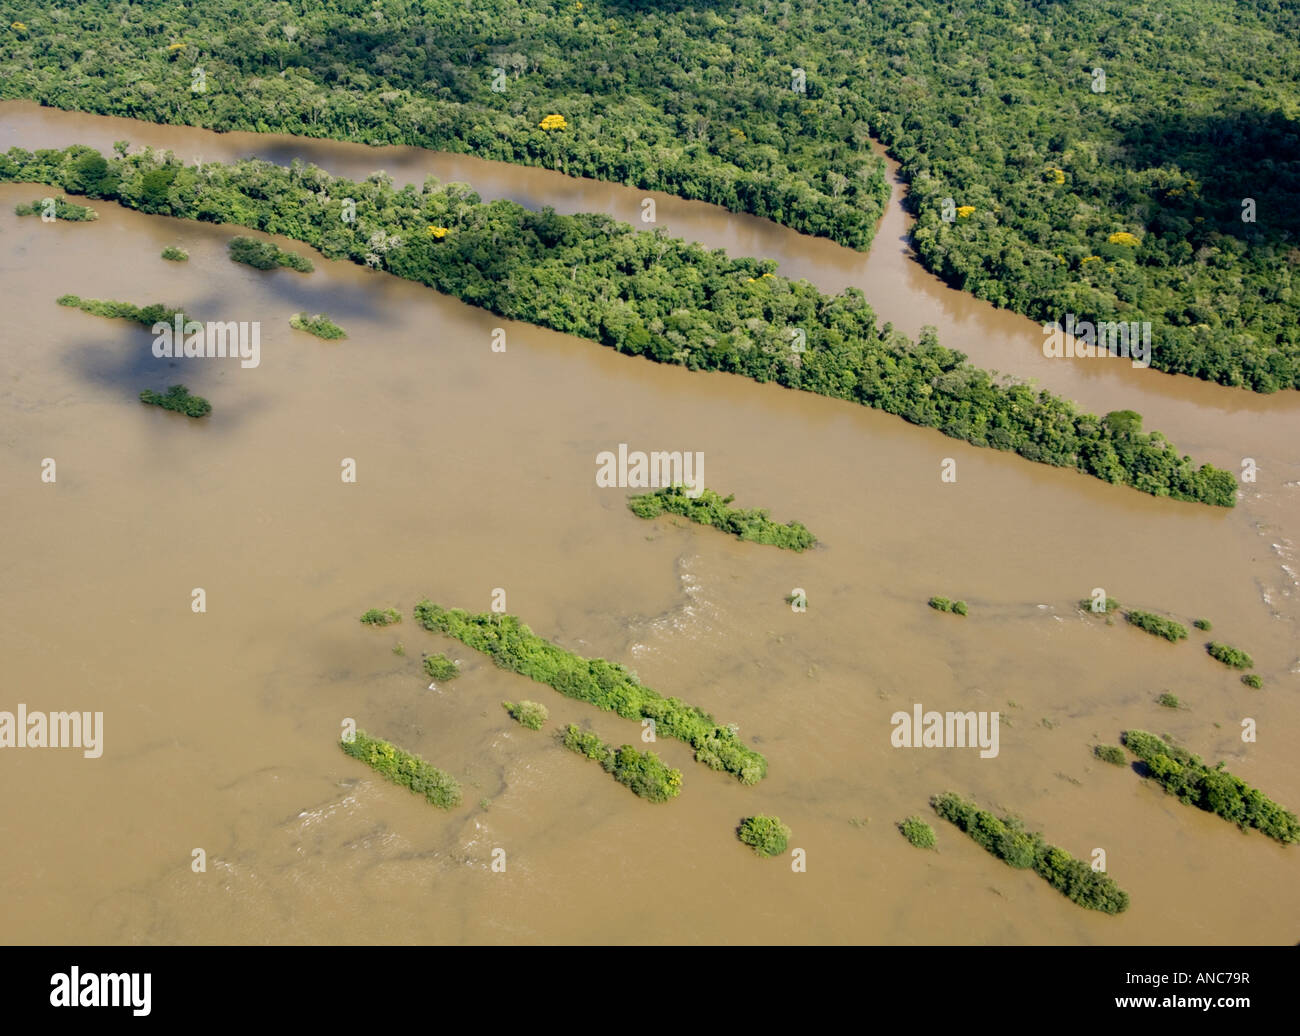 Aerial view of a muddy river and flooded forest in Iguacu National Park, Parana, Brazil Stock Photo